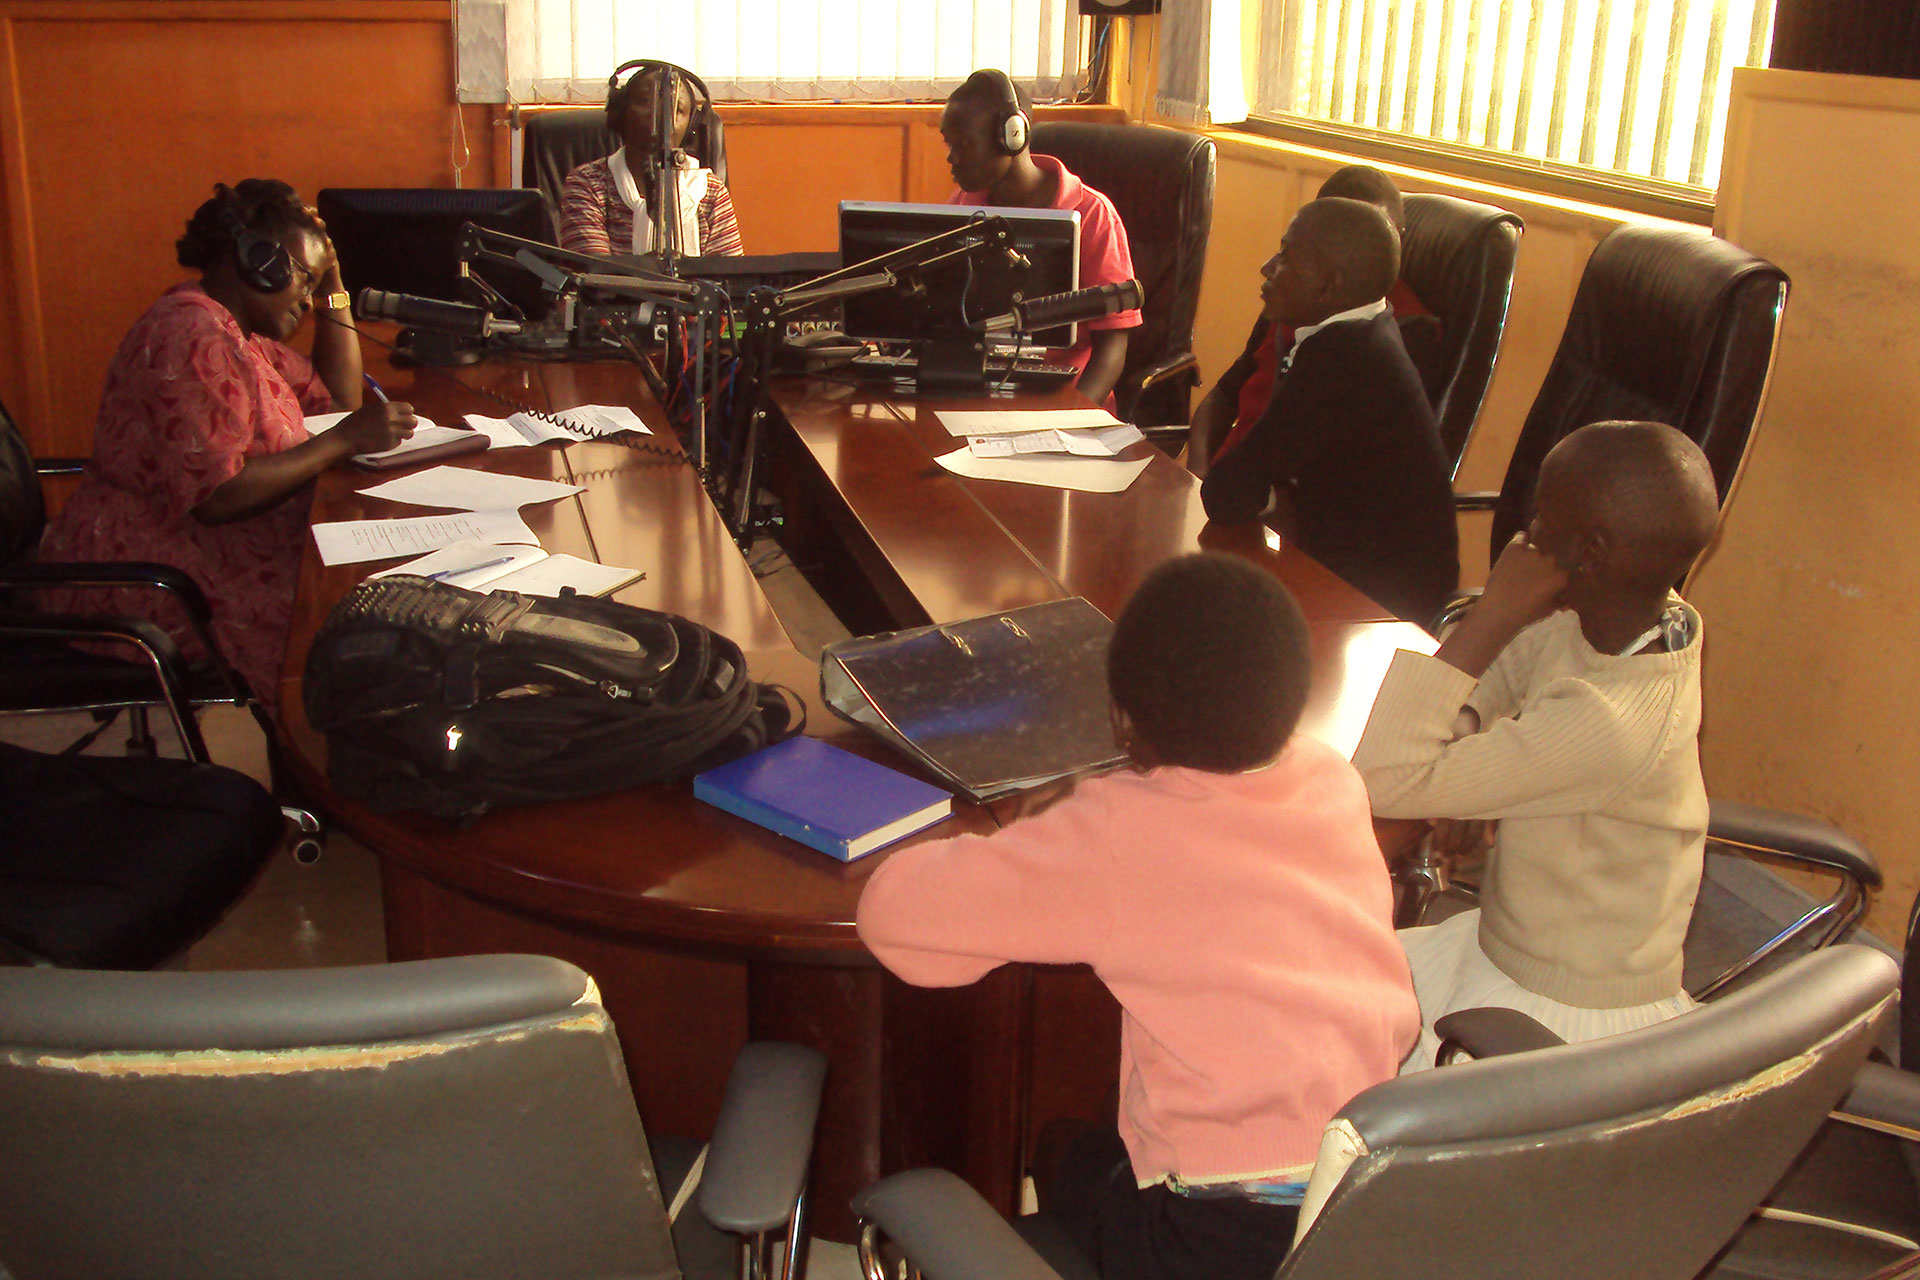 Child Rights Radio Program and Strengthening Child Protection Systems